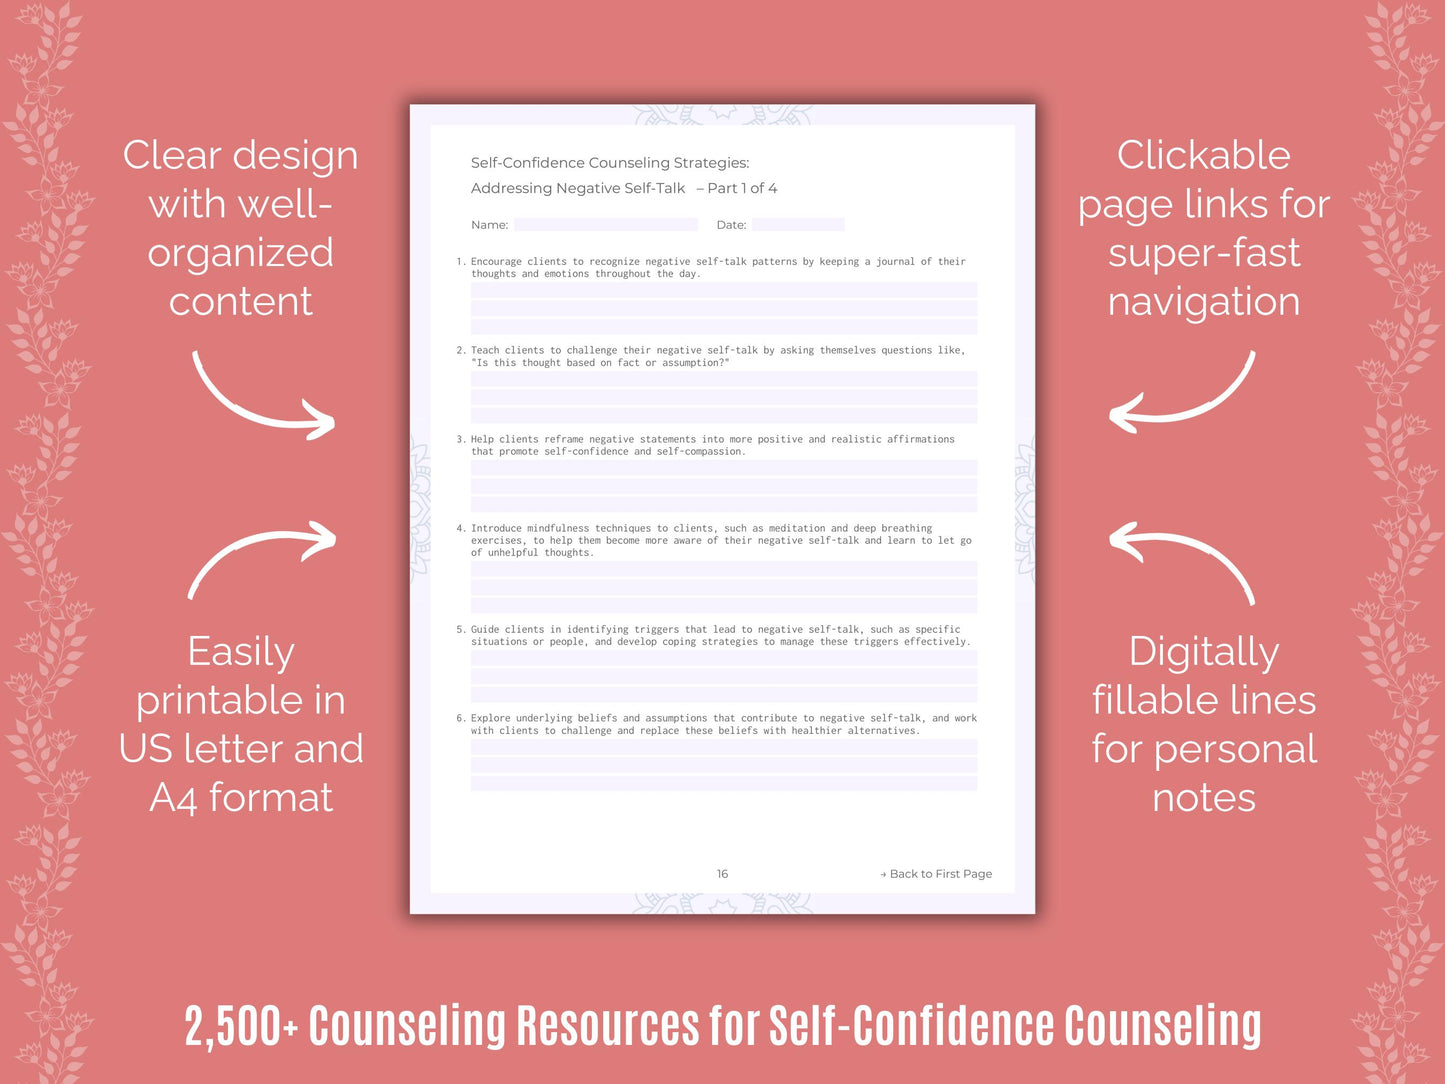 Workbook, Counseling, Self-Confidence Tool, Template, Resource, Therapy, Content, Mental Health, Self-Confidence Idea, Counselor, Therapist, Self-Confidence, Worksheet